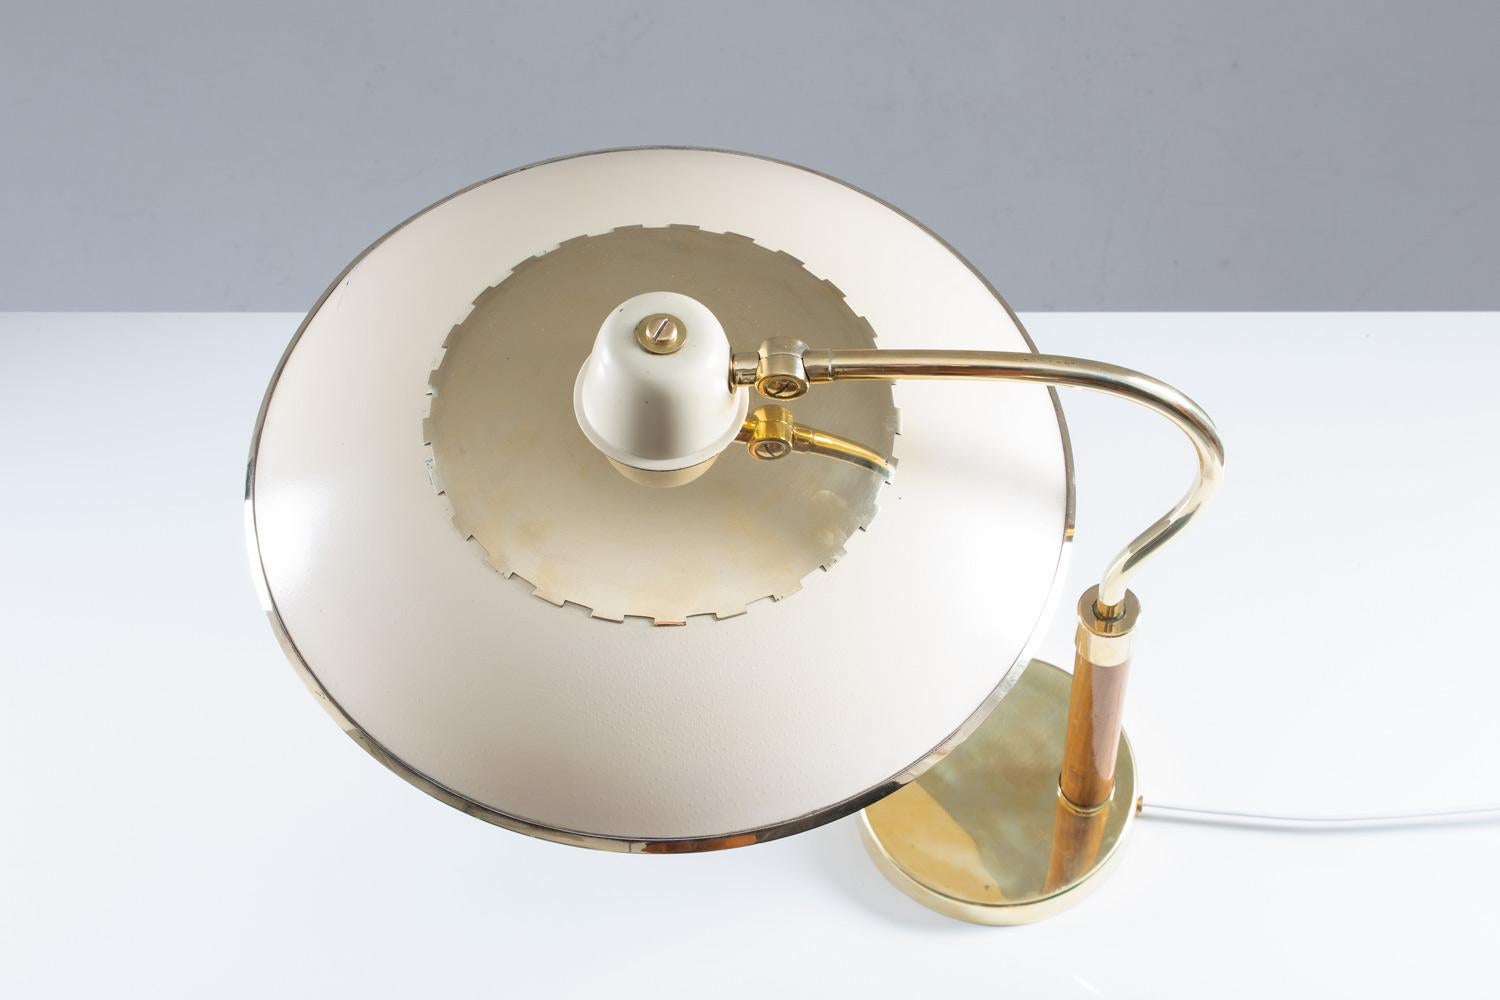 Swedish Midcentury Table Lamp Model 600 by Boréns in Brass, Glass and Wood In Good Condition For Sale In Karlstad, SE